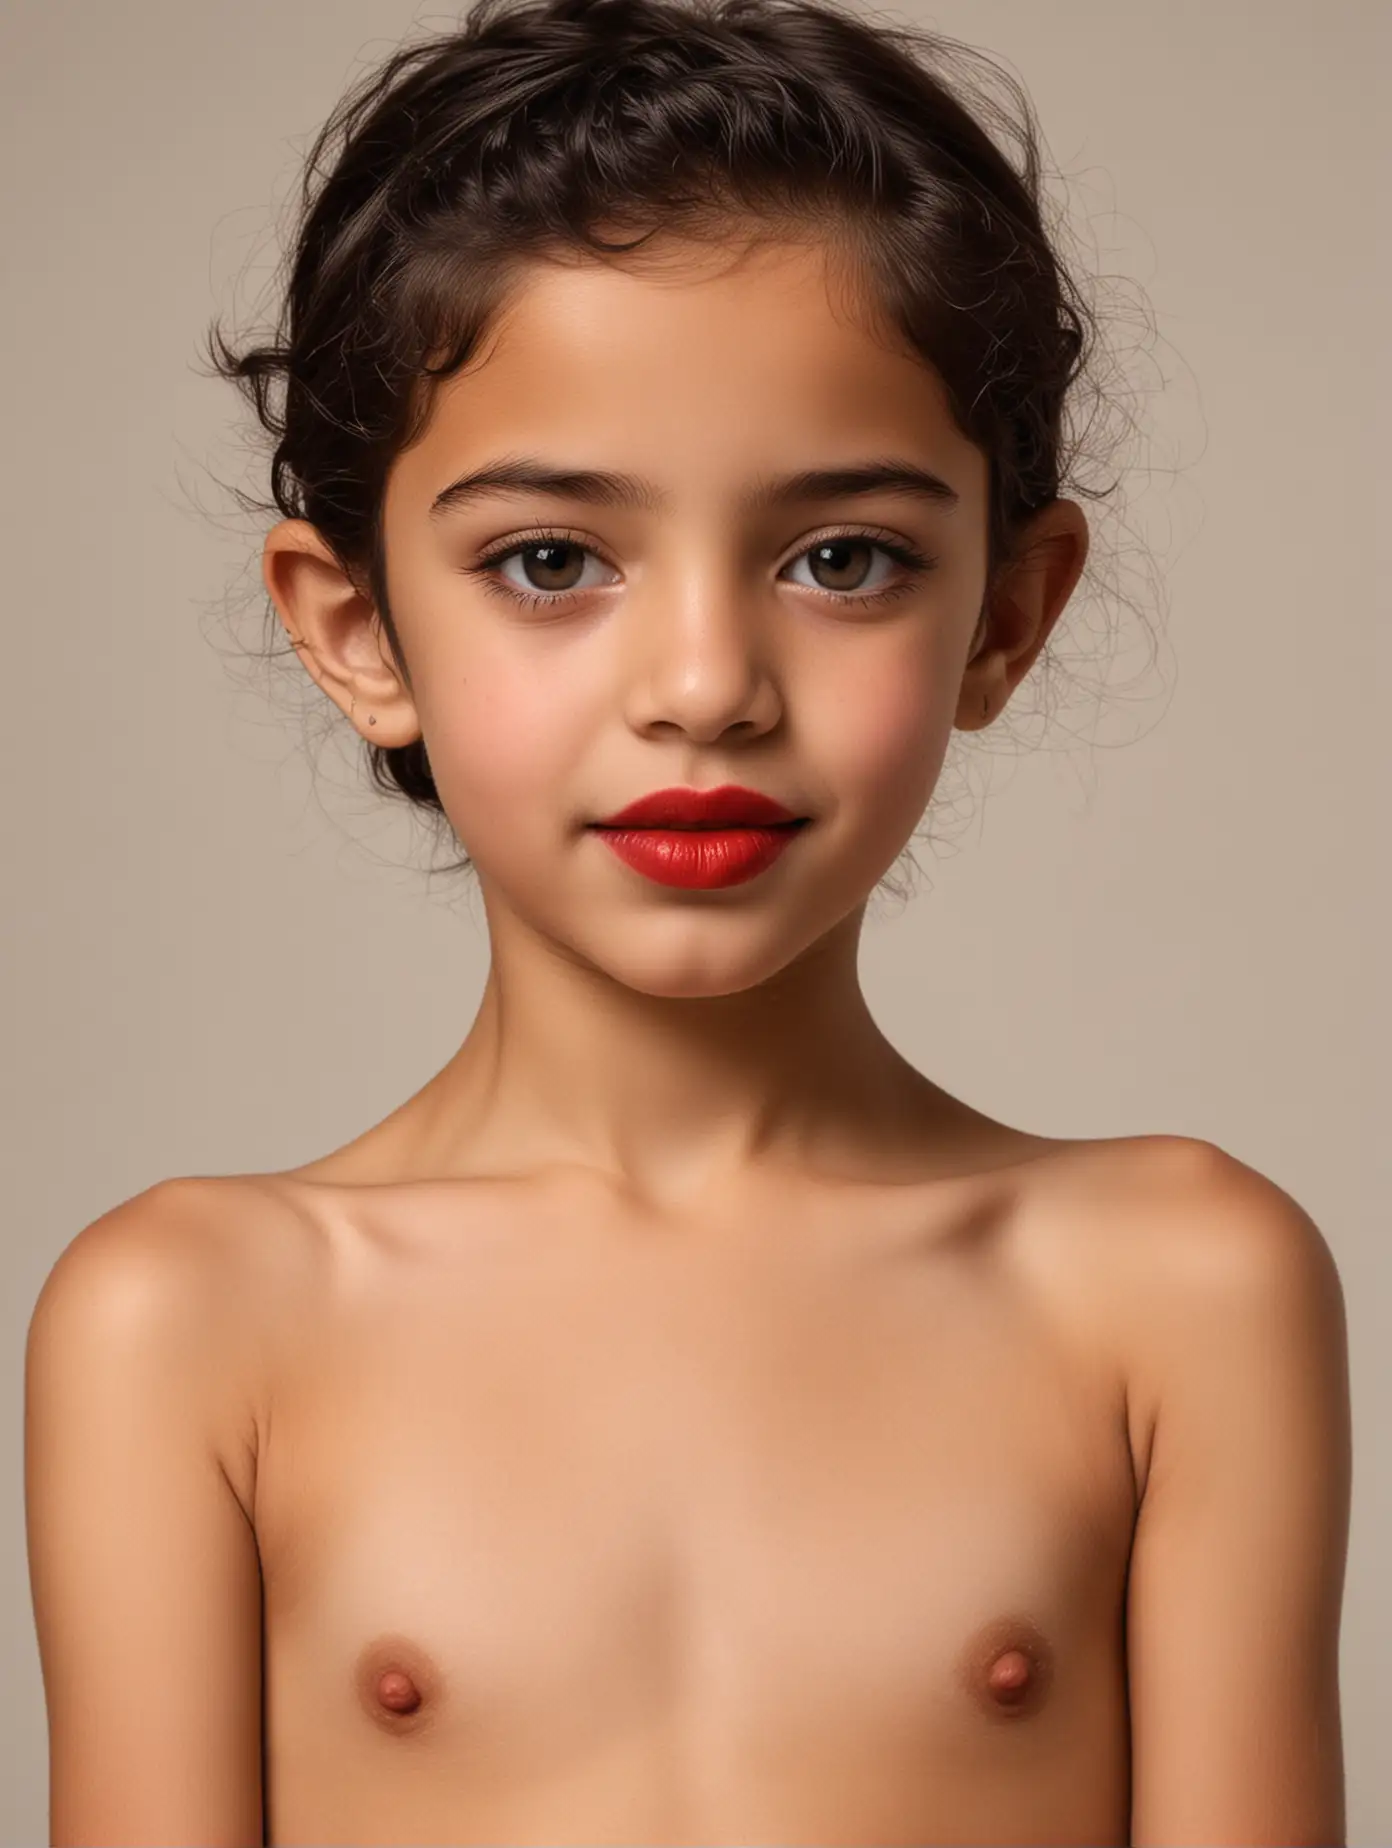 Sexy, topless, red lipstick, skinny, ten year old, Egyptian girl.